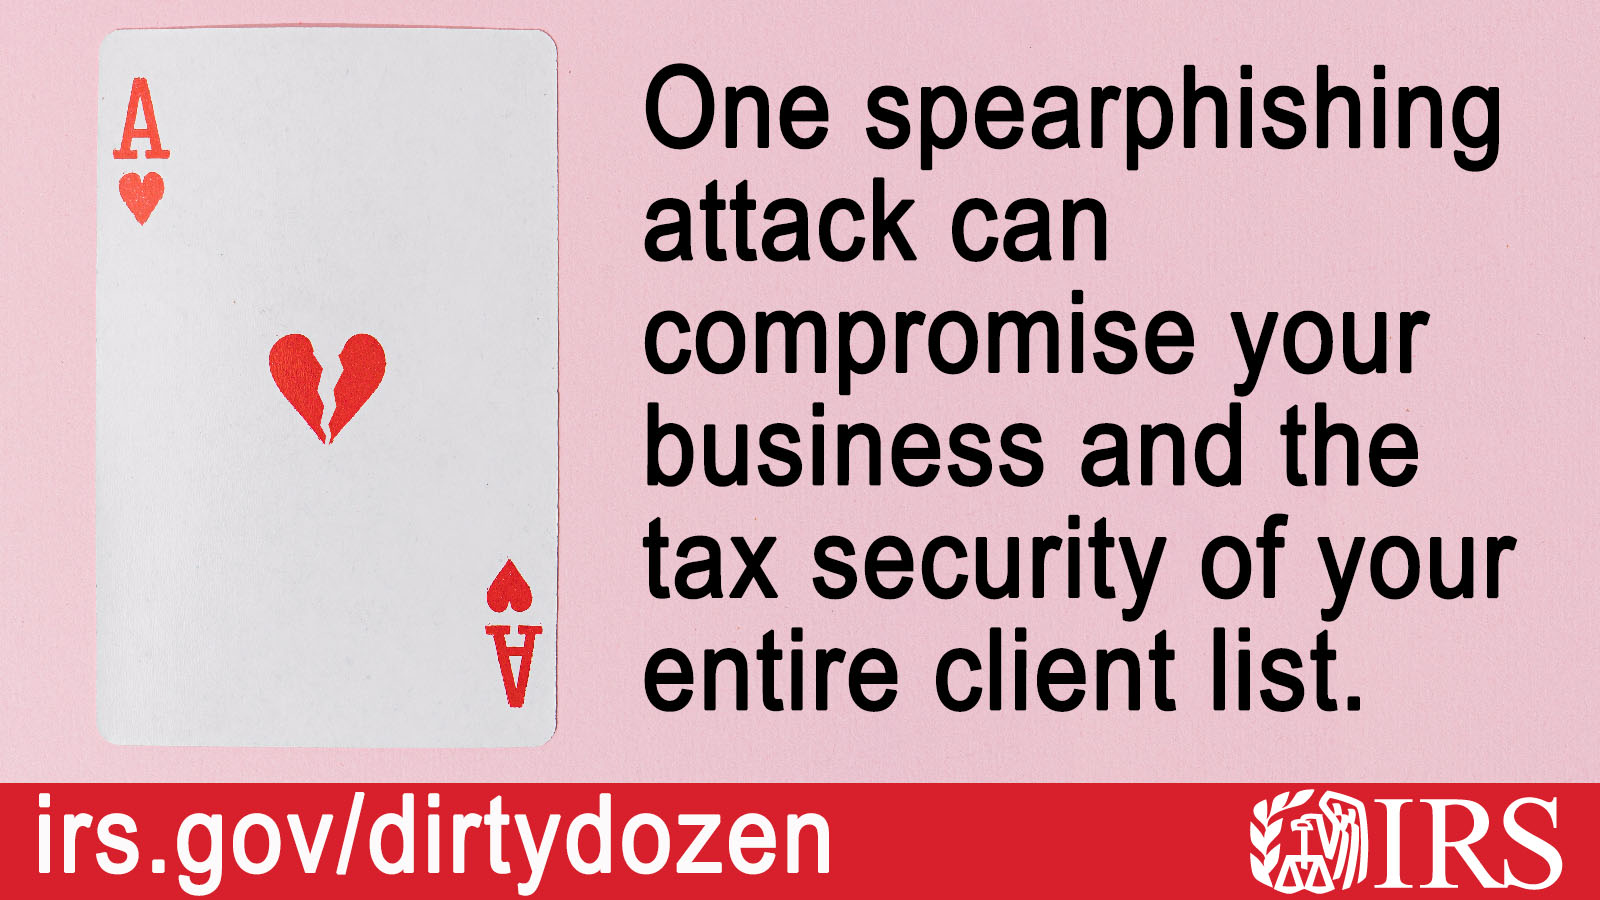 An ace of hearts card with a broken heart in the center. Text: One spearphishing attack can compromise your business and the tax security of your entire client list. Irs.gov/dirtydozen and IRS logo.